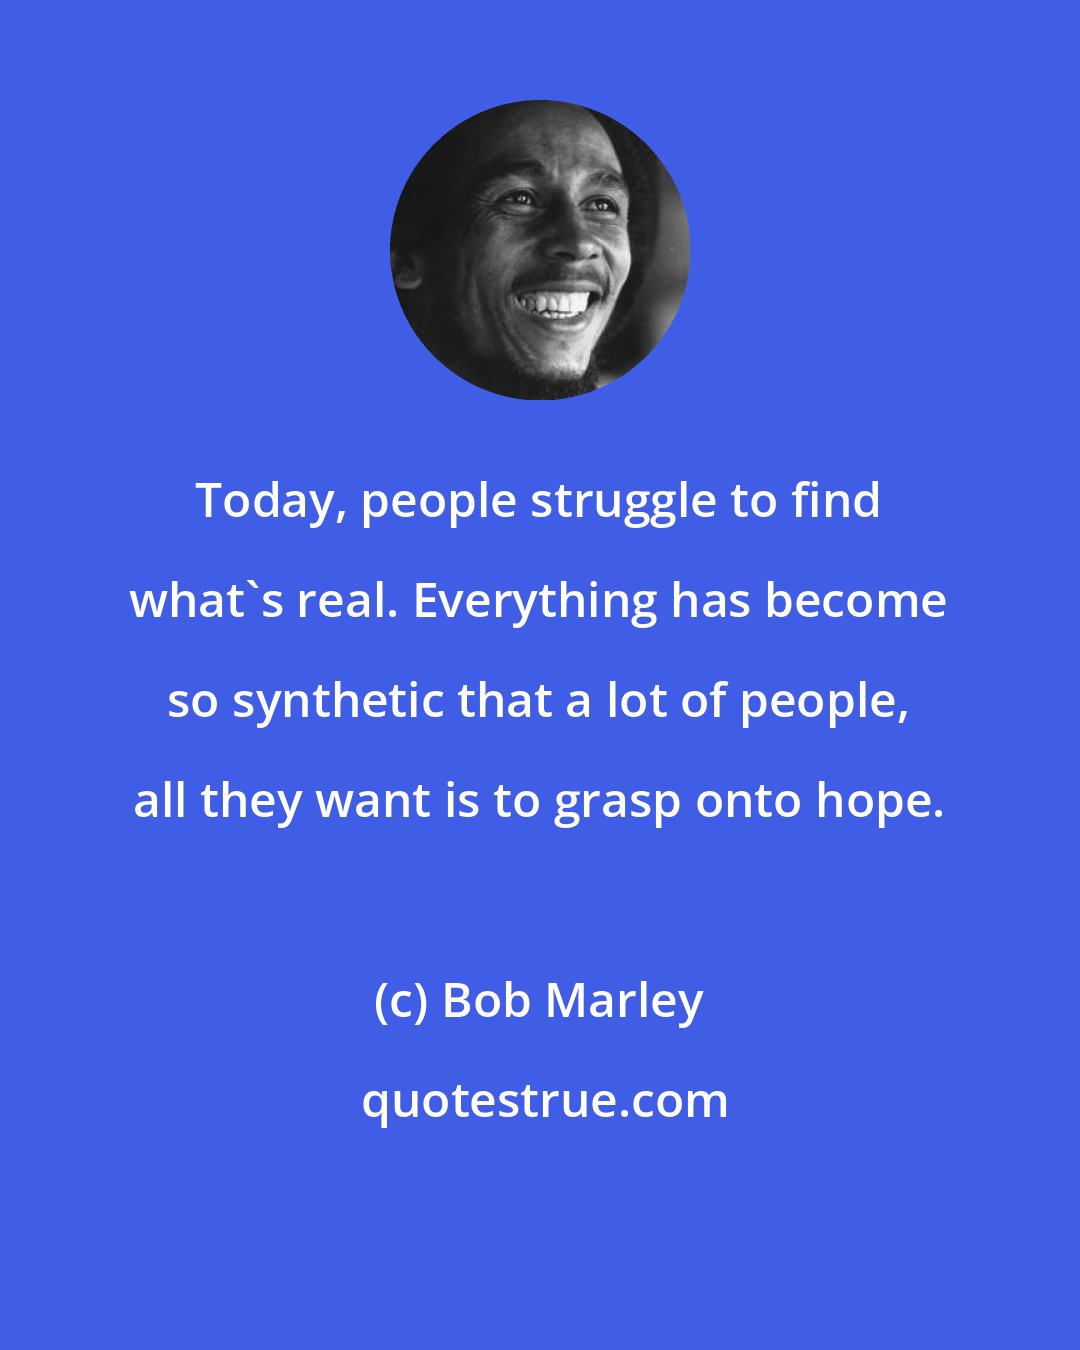 Bob Marley: Today, people struggle to find what's real. Everything has become so synthetic that a lot of people, all they want is to grasp onto hope.